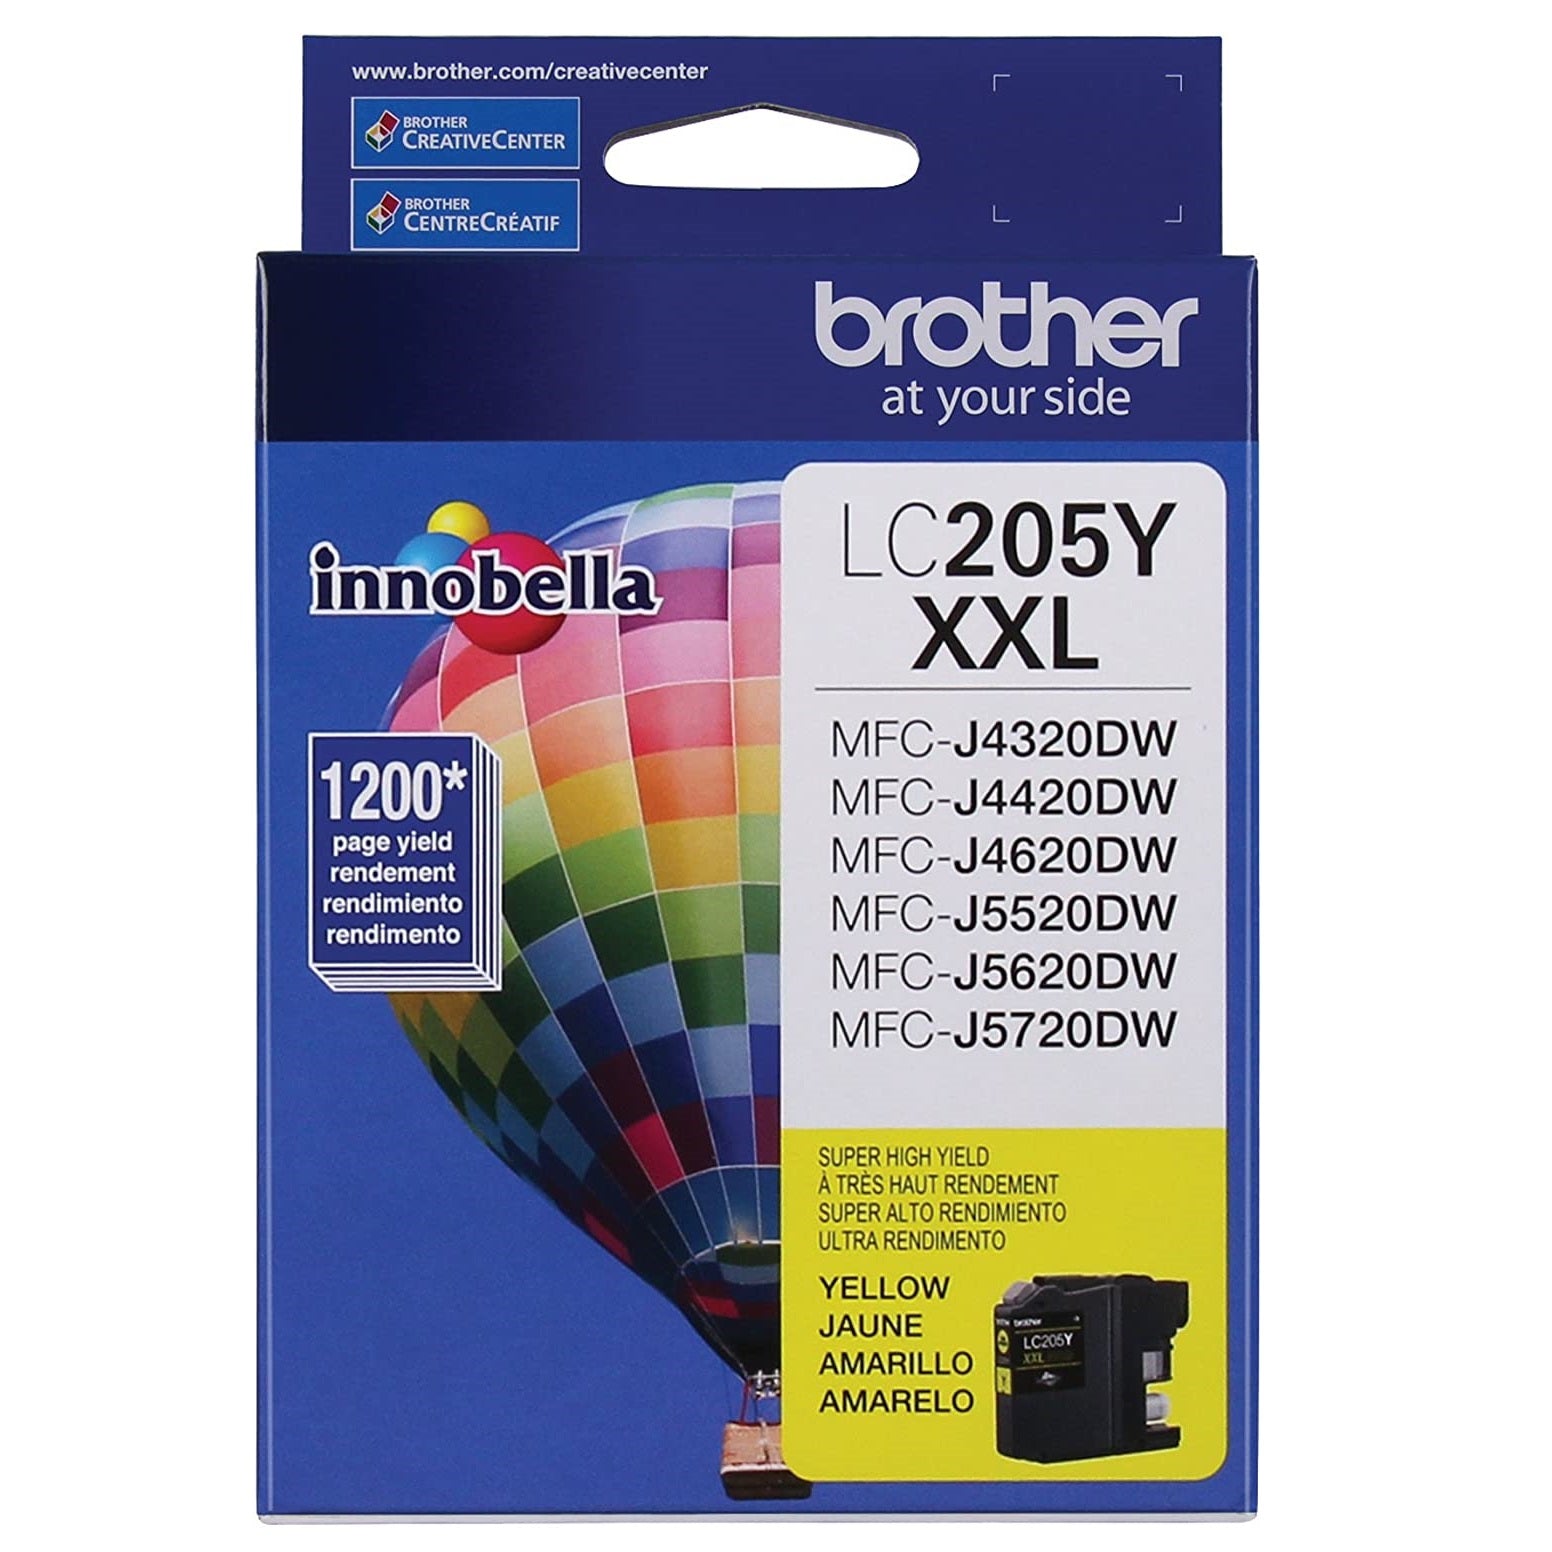 Absolute Toner Original Brother LC205 (LC205YS) OEM Genuine Extra High Yield Yellow Ink Cartridge Original Brother Cartridges